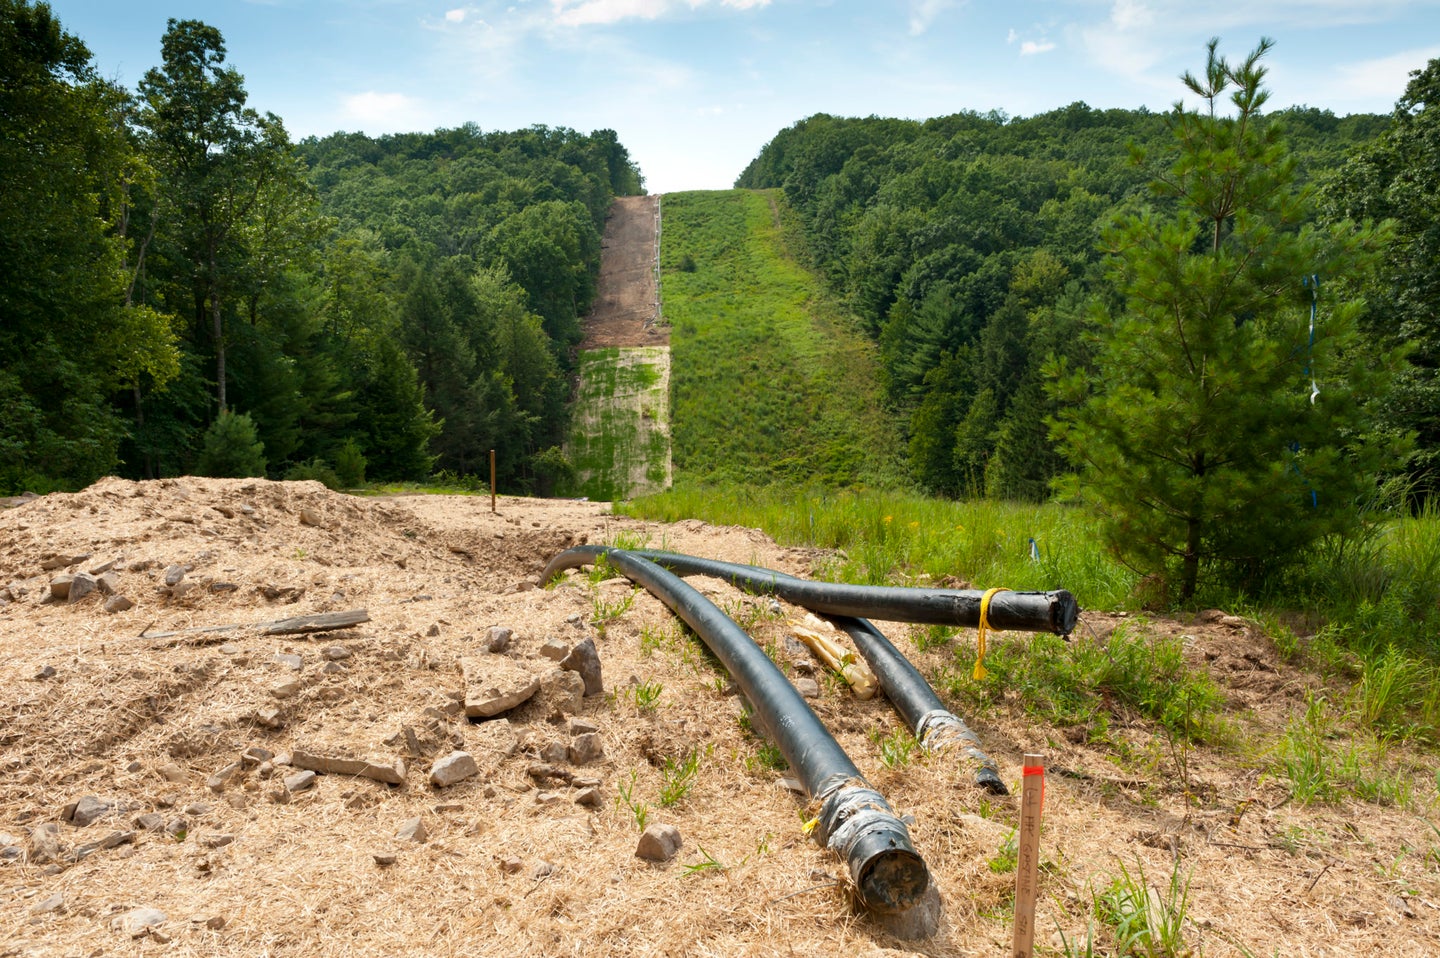 A gas pipeline under construction in a clear-cut strip of forest